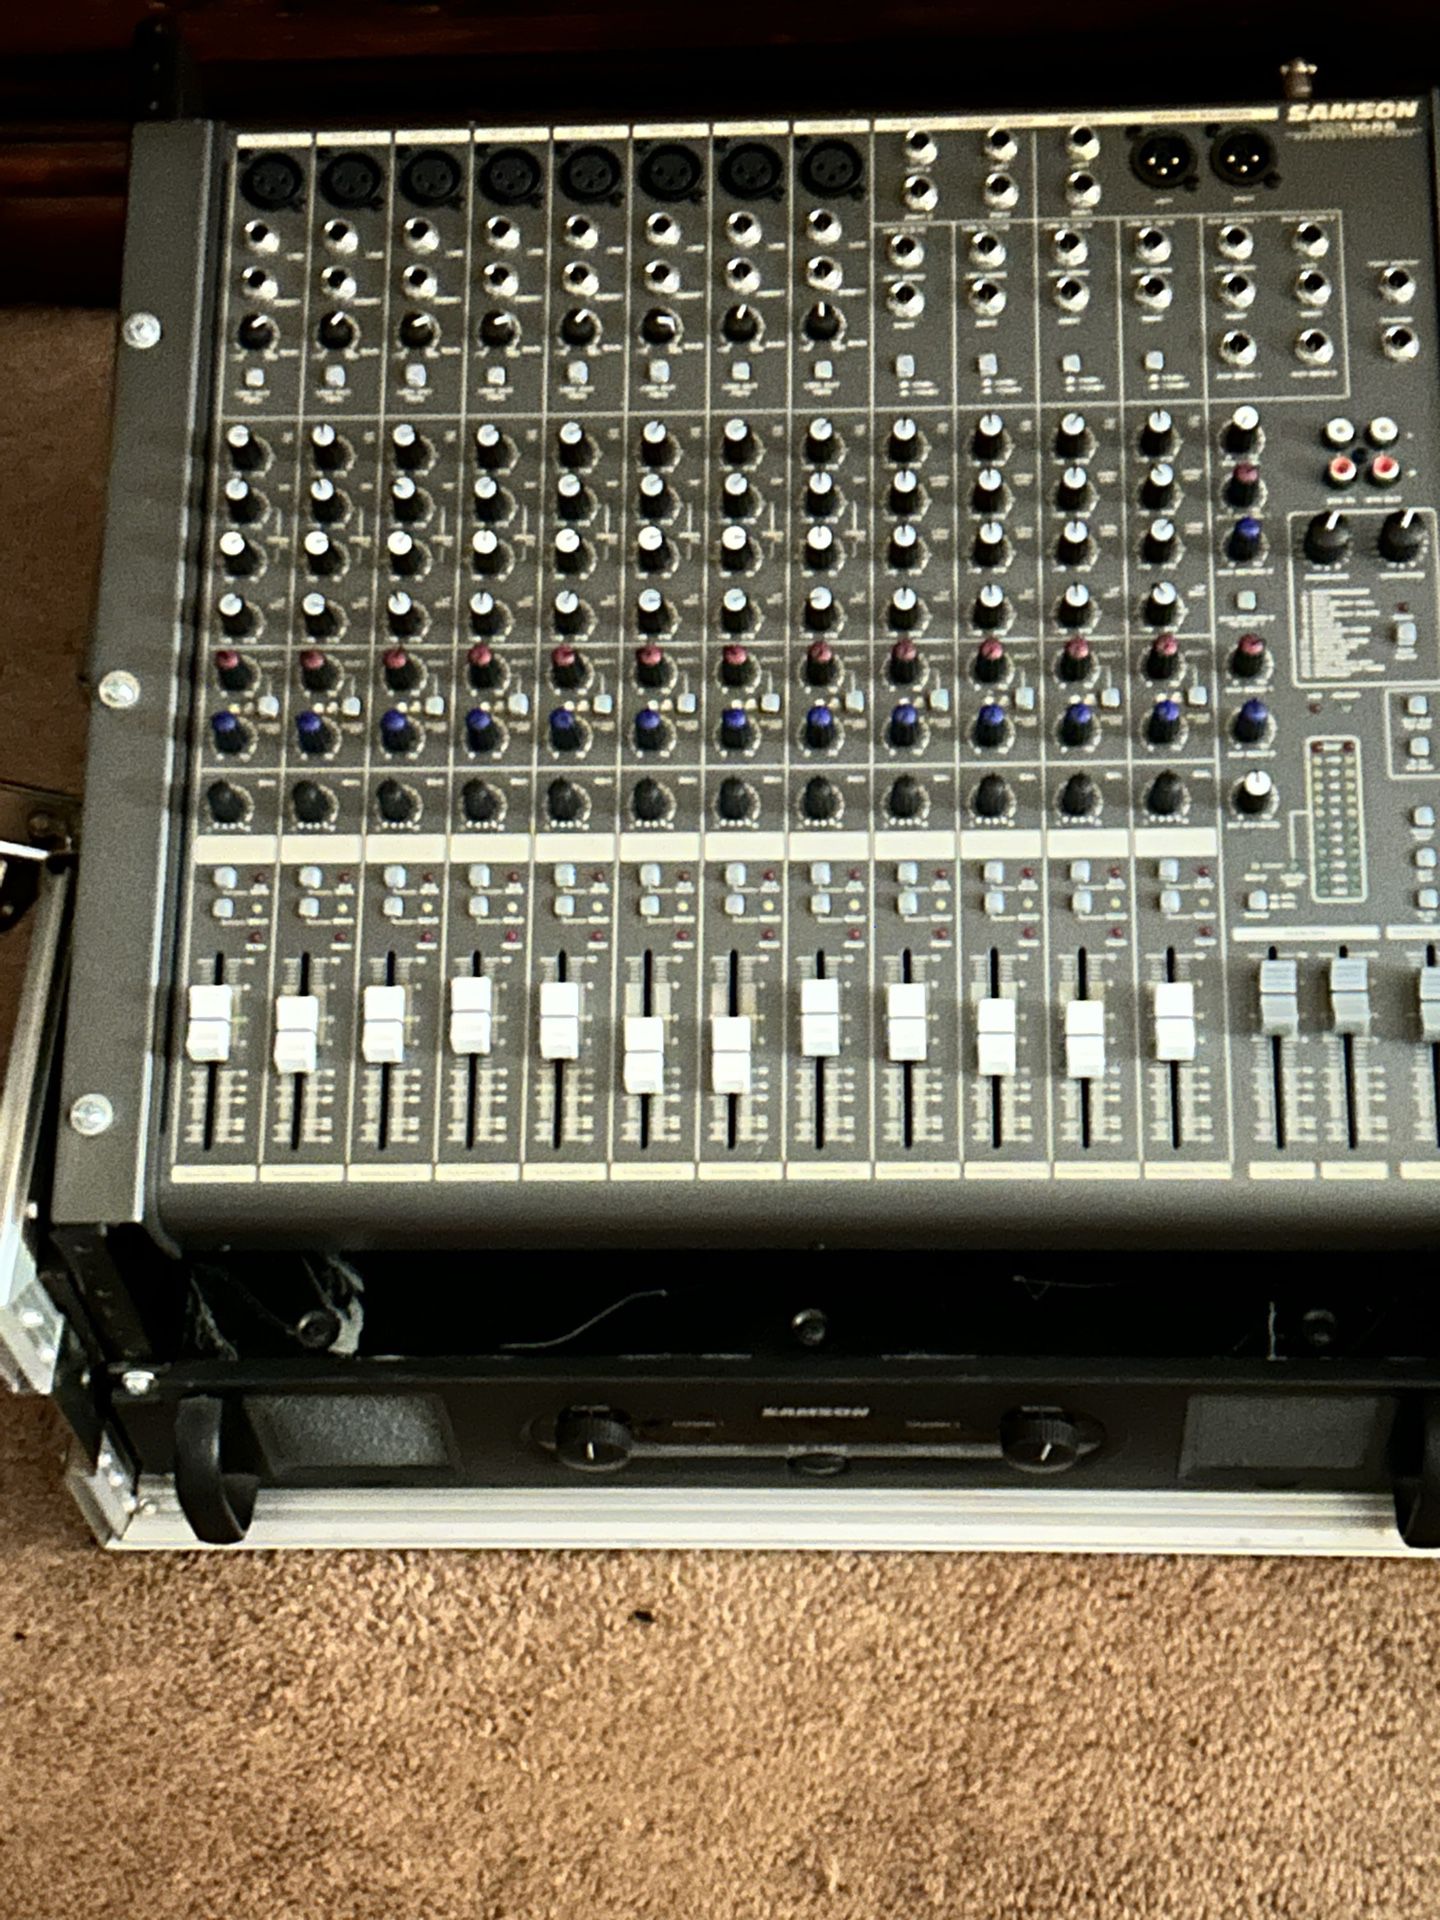 Samson 12 Channel Mixer With Samson Power Amplifier In Protective Case 